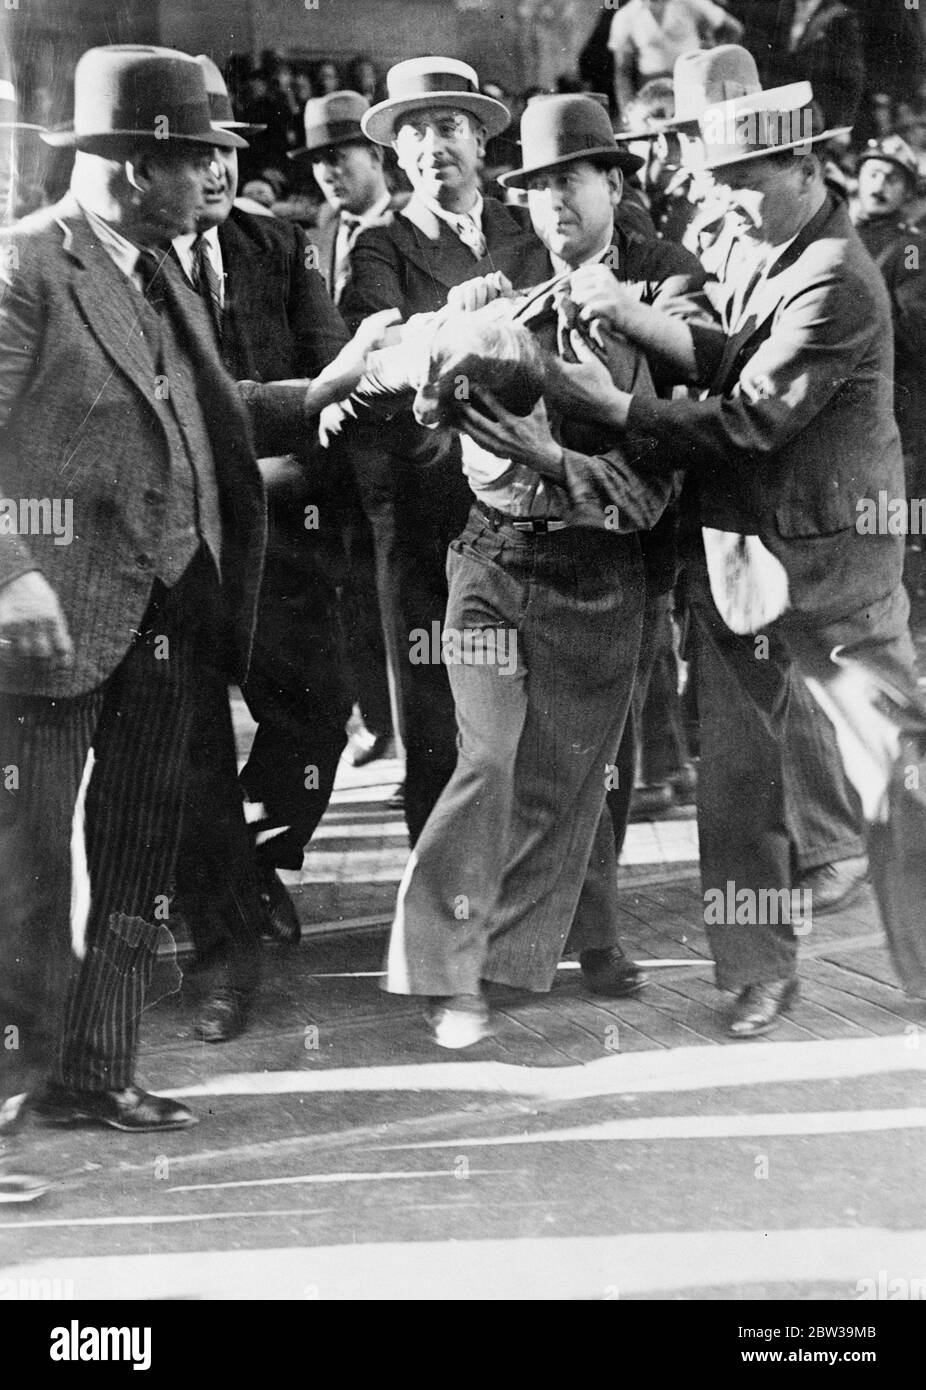 More than a thousand arrests in Paris anti wage cut riots - police in fierce battles with demonstrators . An arrested demonstrator struggling to get free in the Boulevard Haussmann . 20 July 1935 Stock Photo